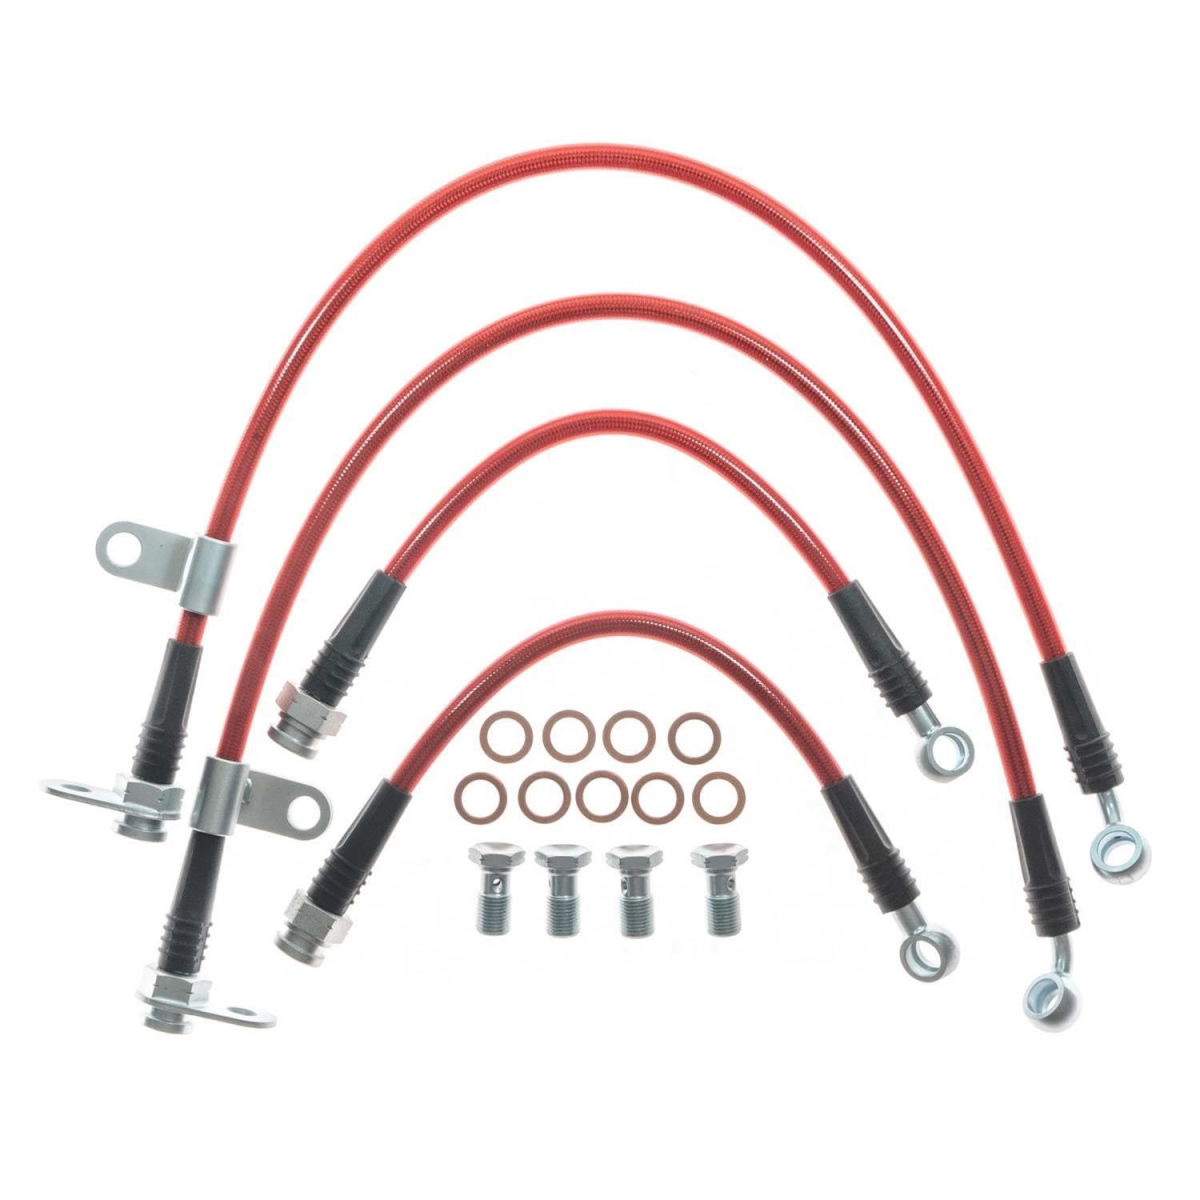 Picture of PowerStop BH00213 Front & Rear Stainless Steel Braided Brake Hose Kit for 2016-20 Mazda MX-5 Miata